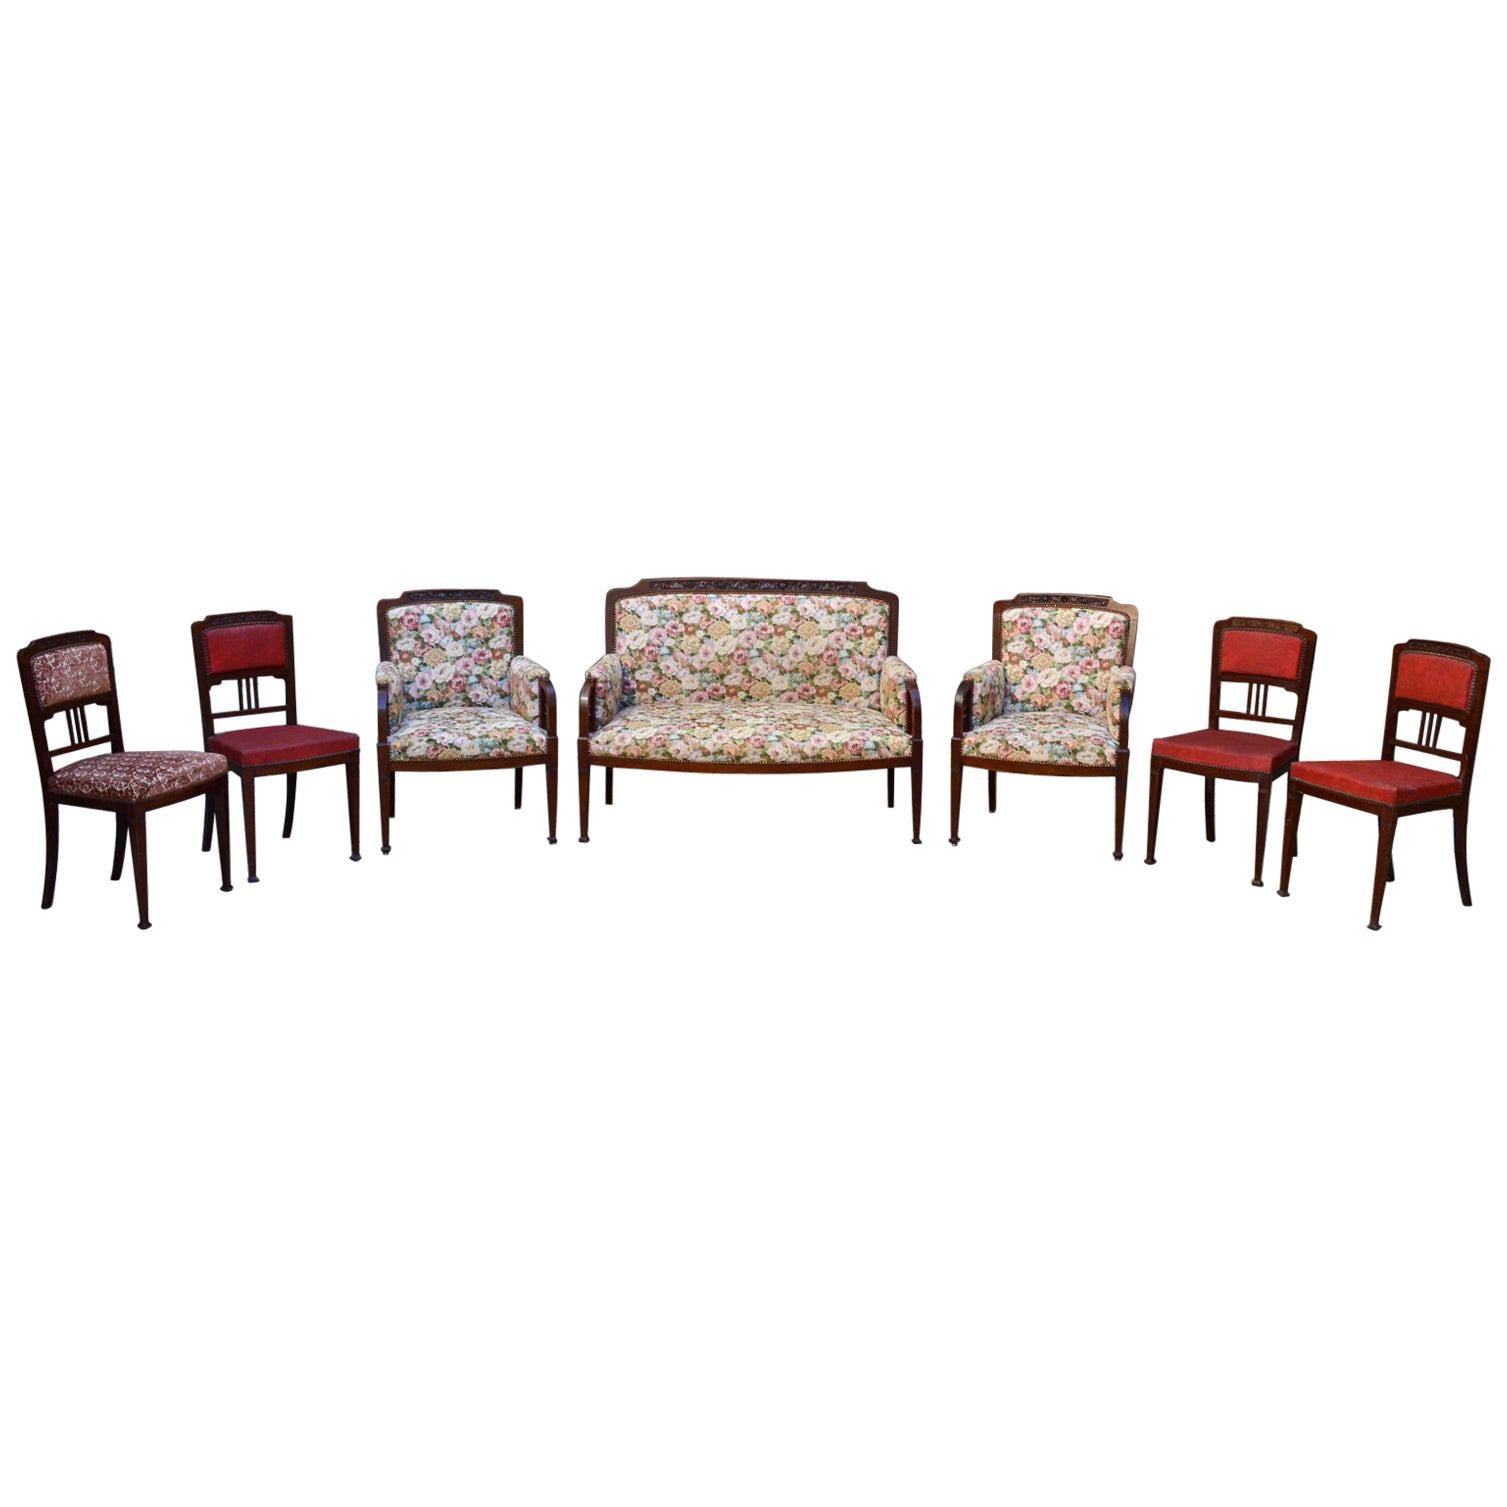 Art Nouveau Salon Set in Carved Mahogany on a Floral Theme, circa 1900 For Sale